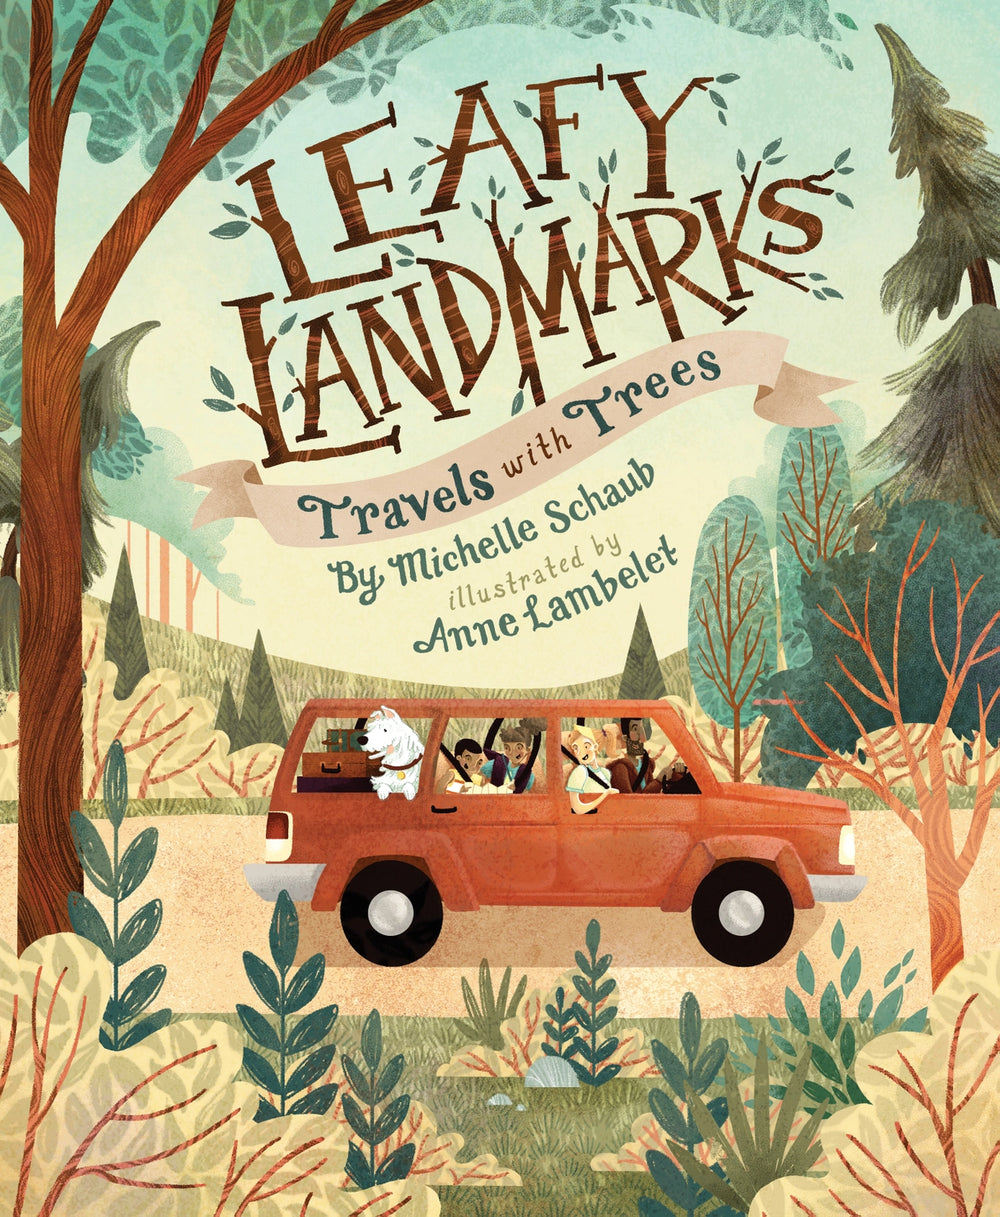 Leafy Landmarks-Travels and Trees Picture Book